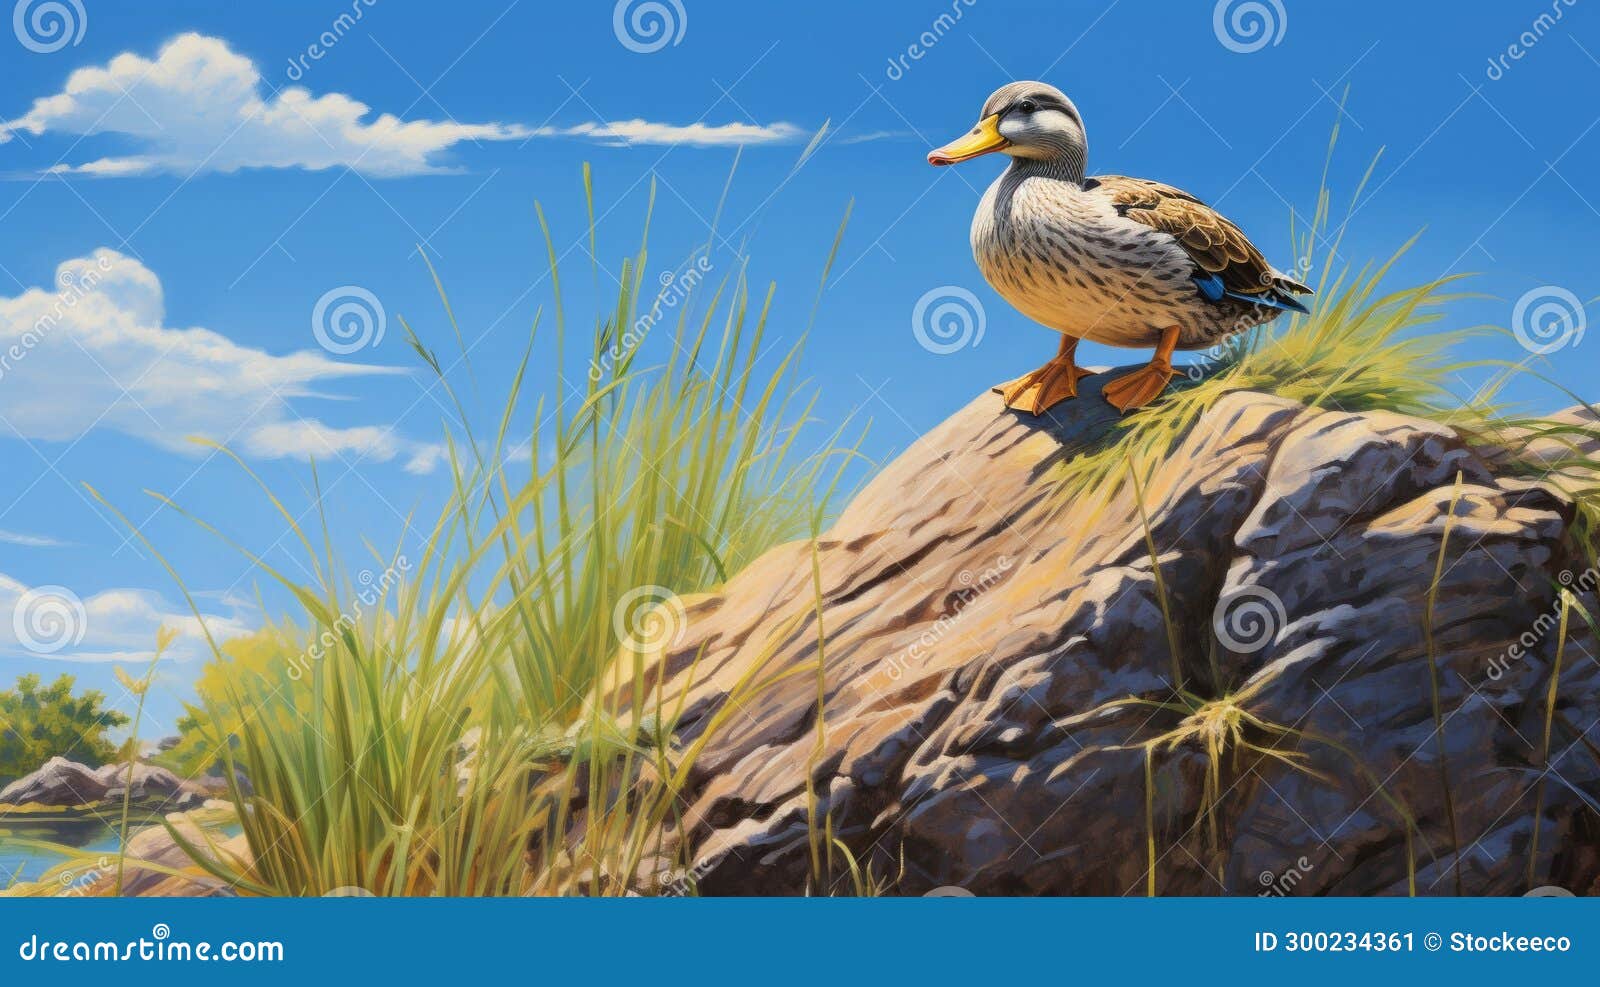 detailed duck painting on rock in greg hildebrandt style